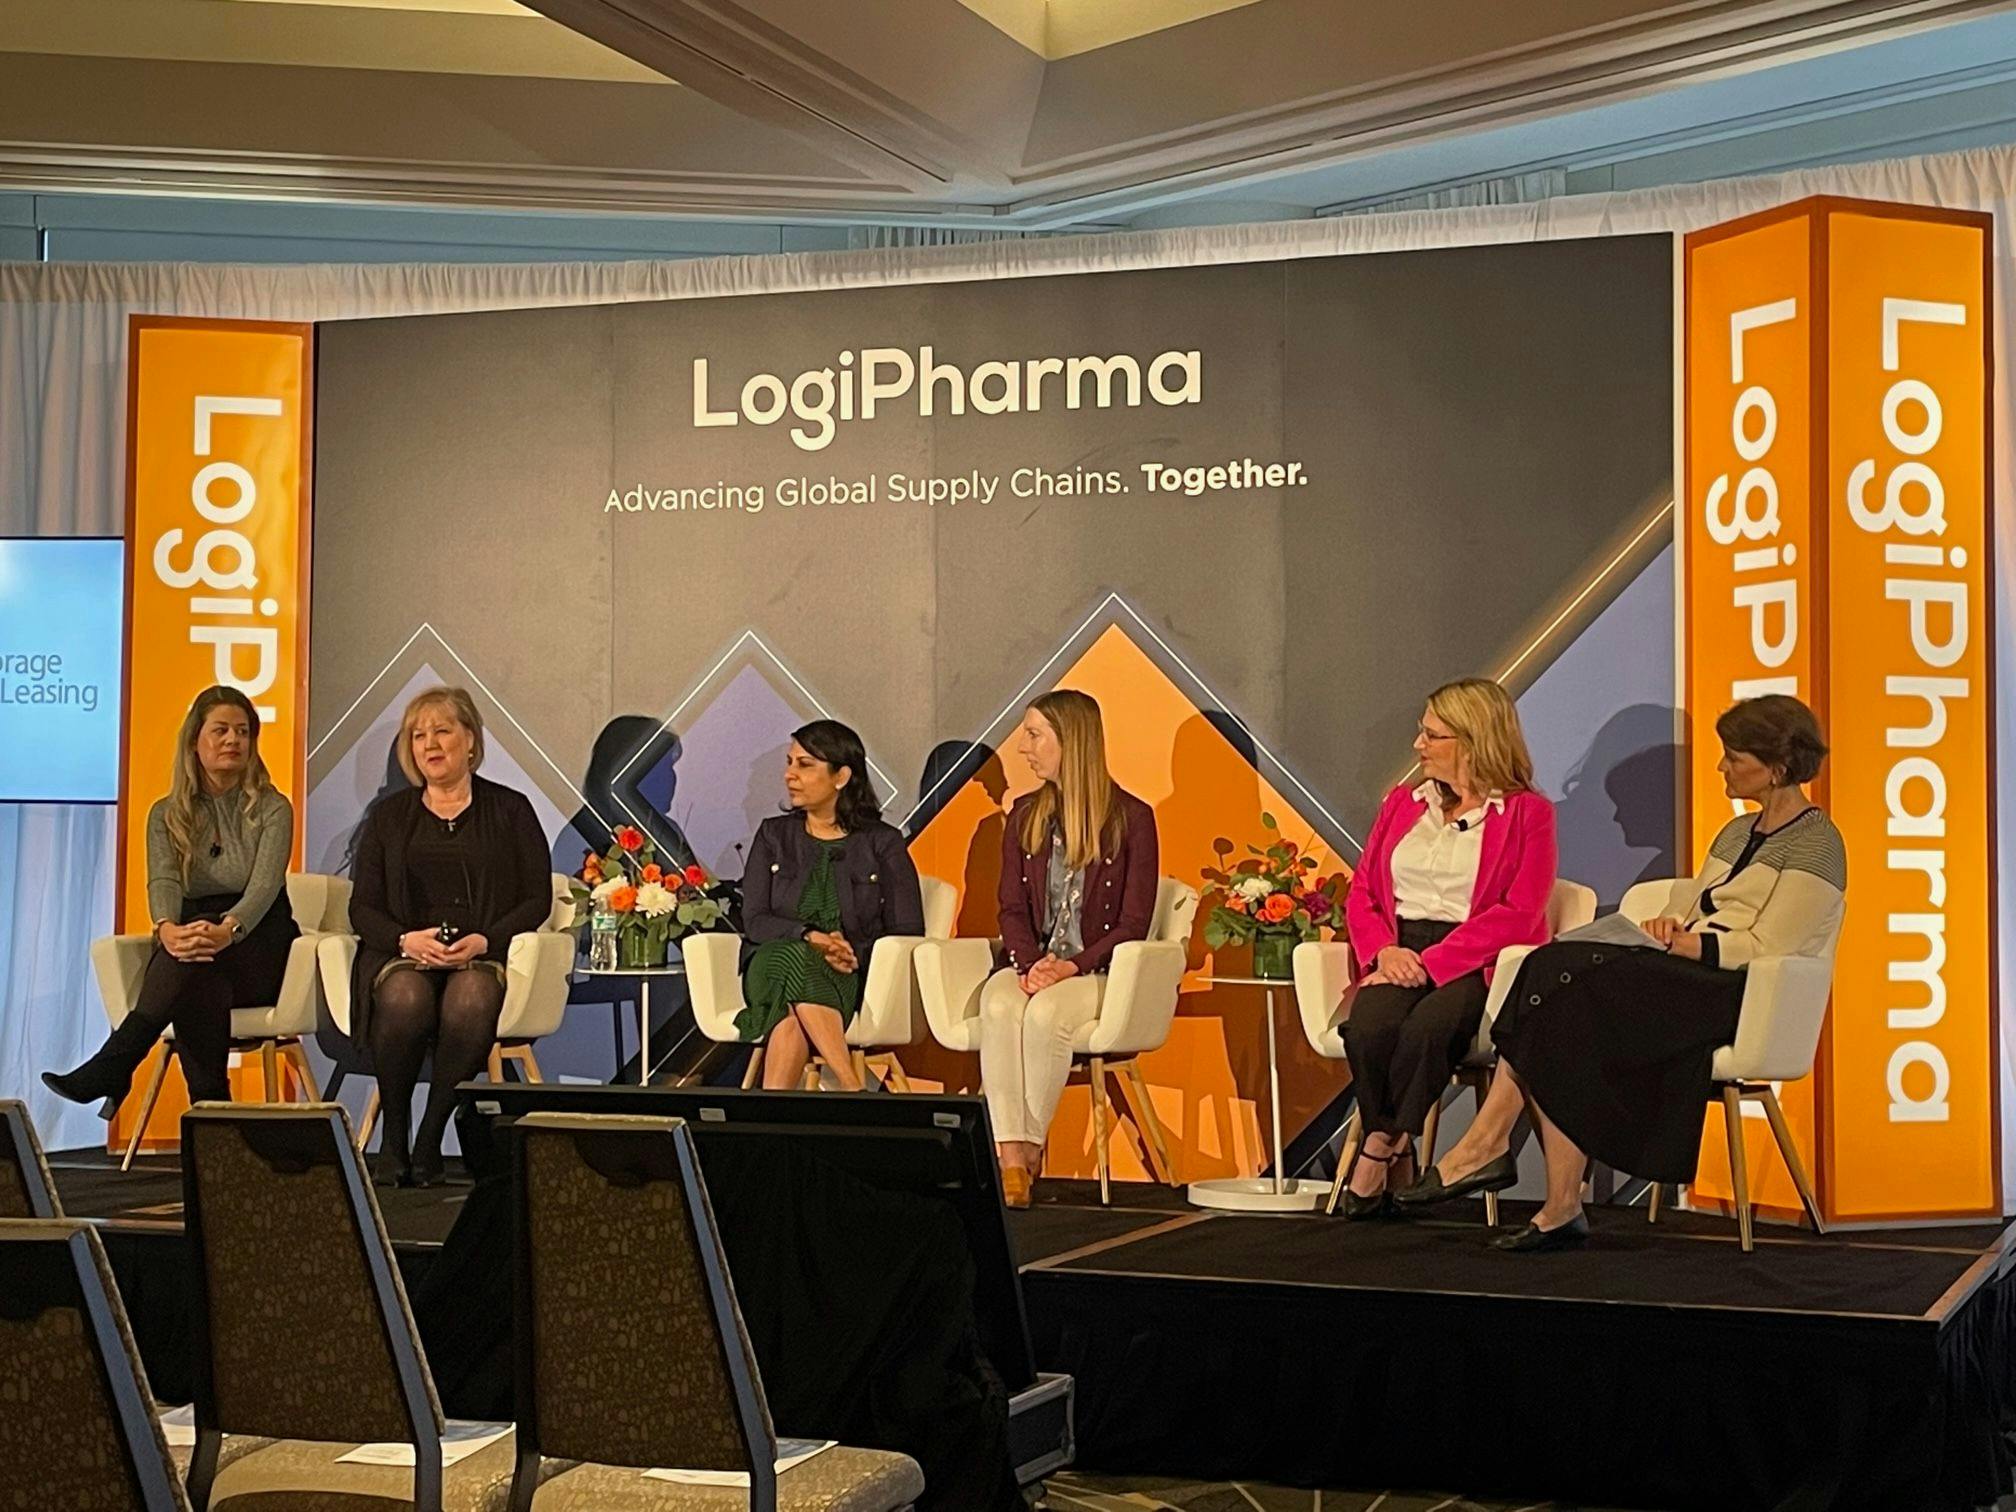 The “Women Leaders in Supply Chain” panel discusses gender-driven obstacles faced in the life sciences sector. 